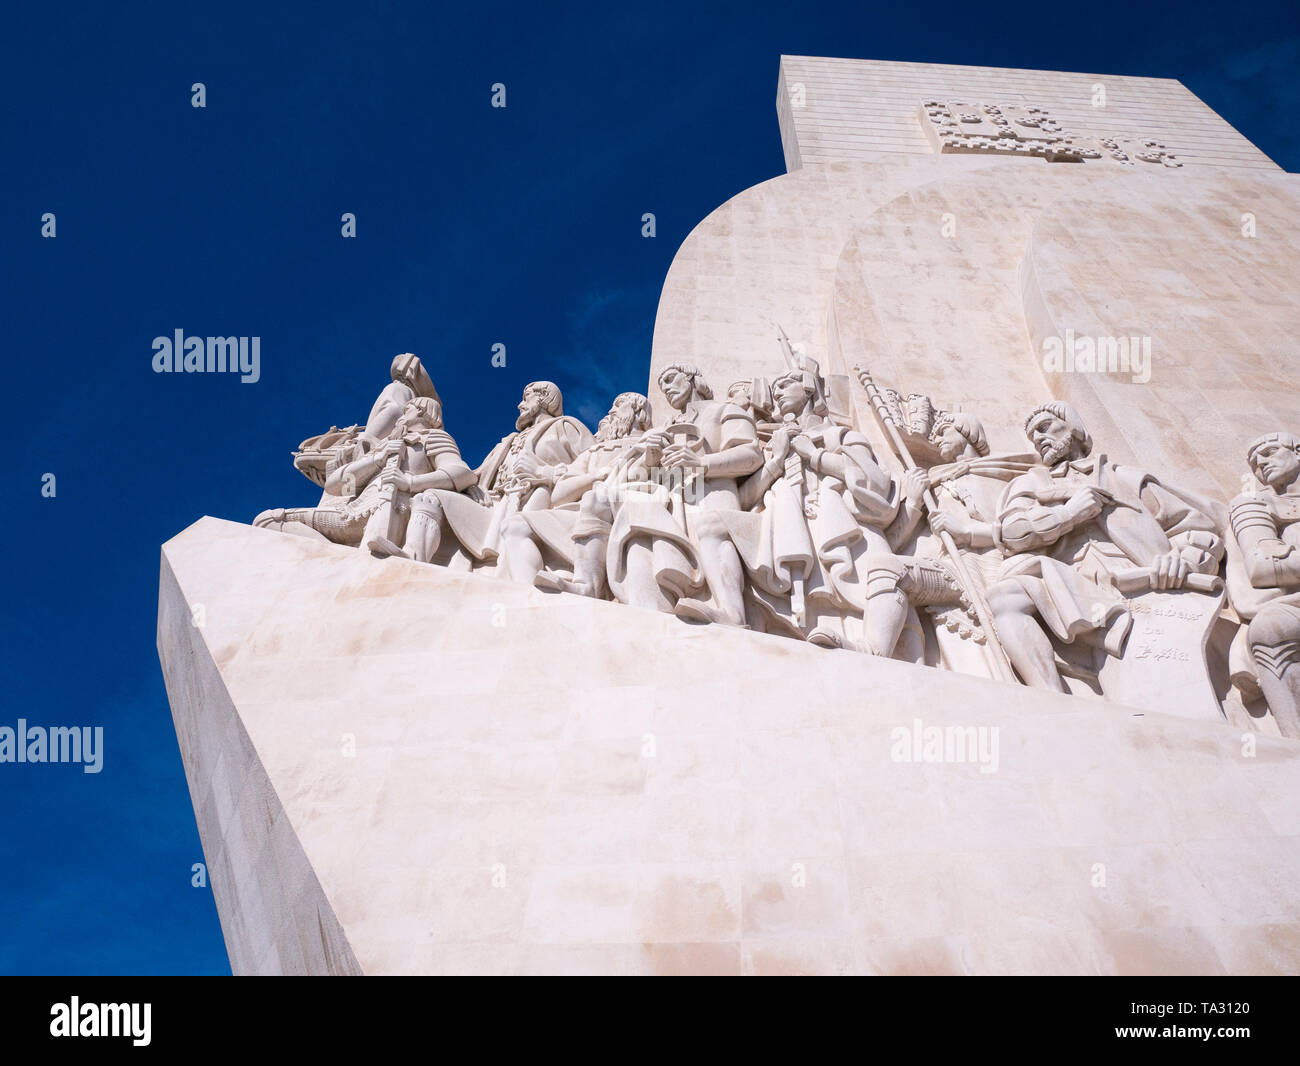 Monument to the Discoveries of the New World in Belem, Lisbon, Portugal. Stock Photo